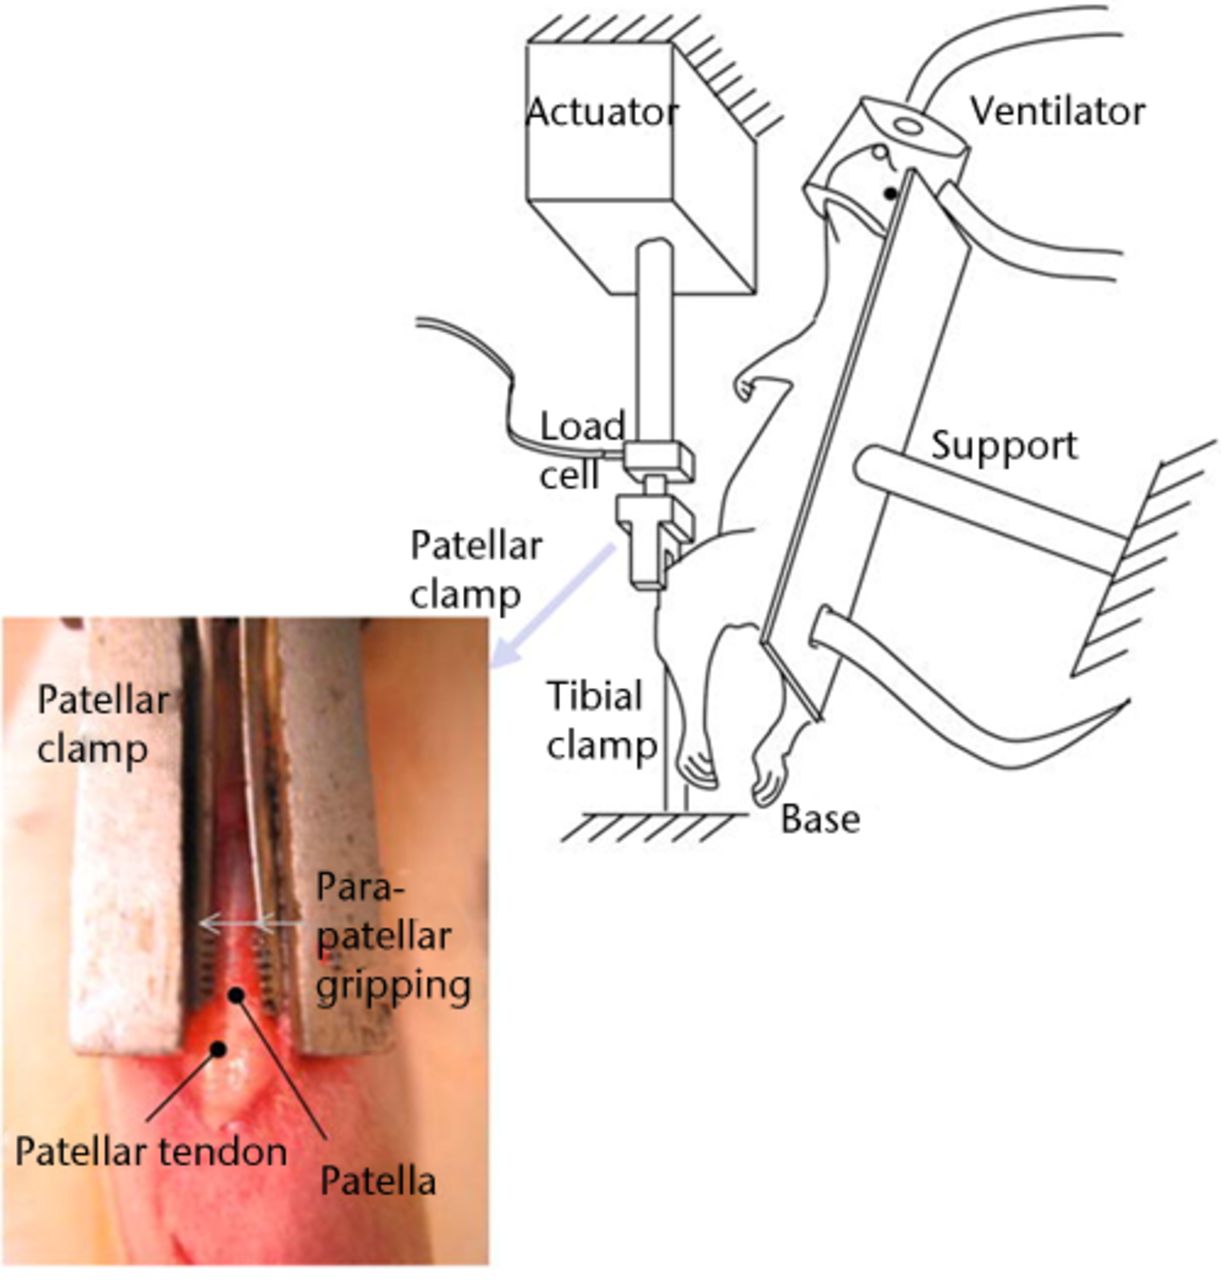 Fig. 5 
          Image demonstrating the experimental
set-up for in vivo fatigue testing of the patellar
tendon. This allowed in vivo tendon loading without
interfering with the movement of the tendon. Reprinted from Fung
DT, Wang VM, Andarawis-Puri N, et al. Early response to tendon fatigue
damage accumulation in a novel in vivo model. J Biomech 2010;43:274-9117 with permission
from Elsevier.
        